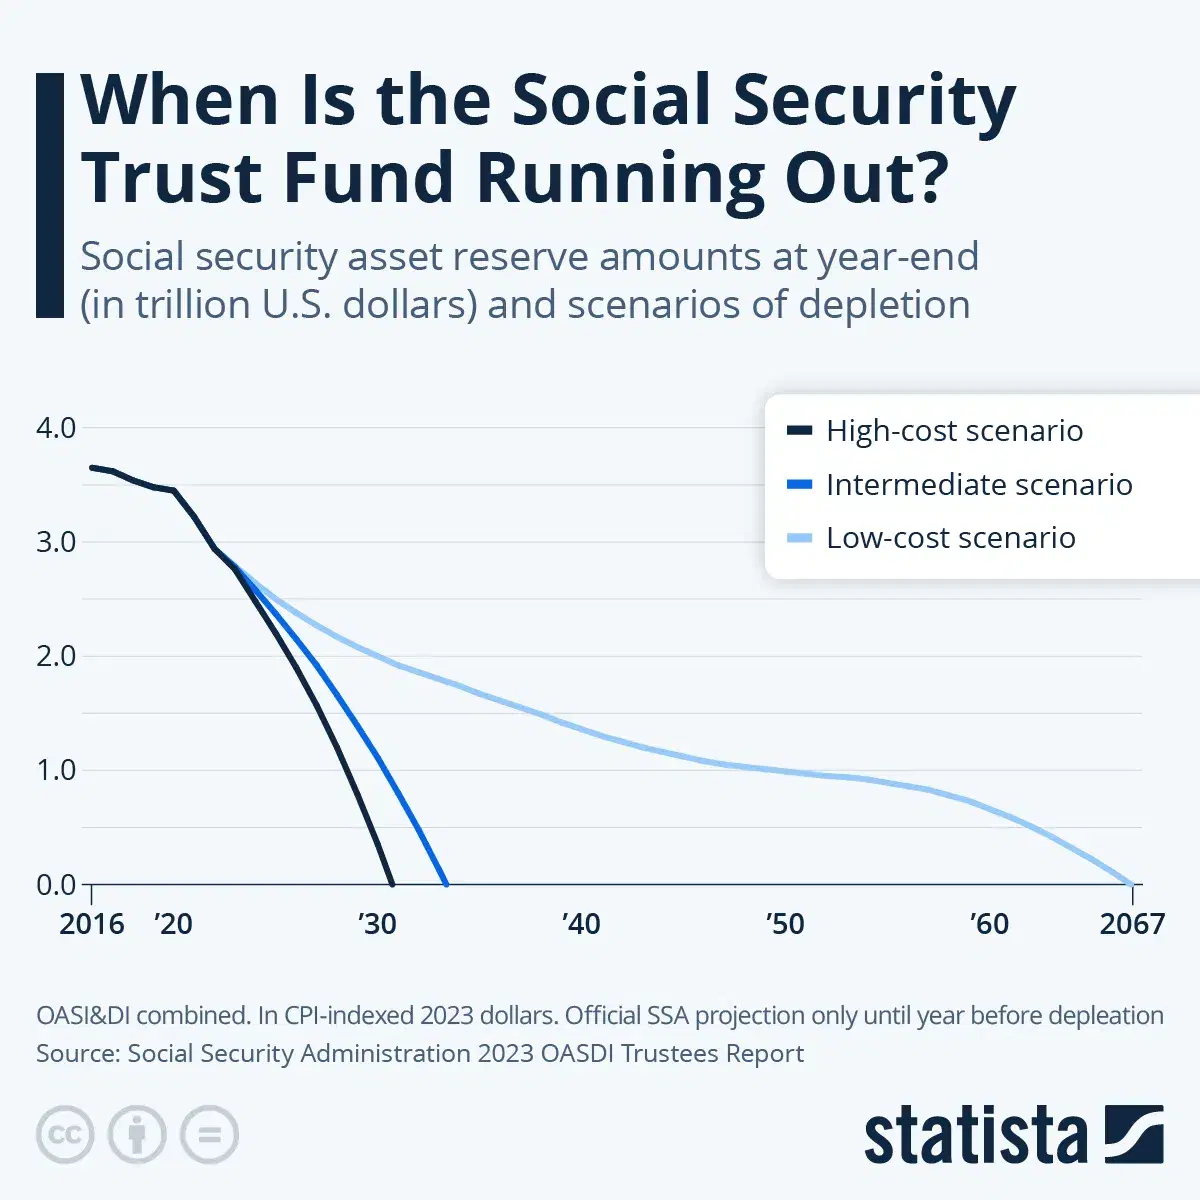 When Is the Social Security Trust Fund Running Out?